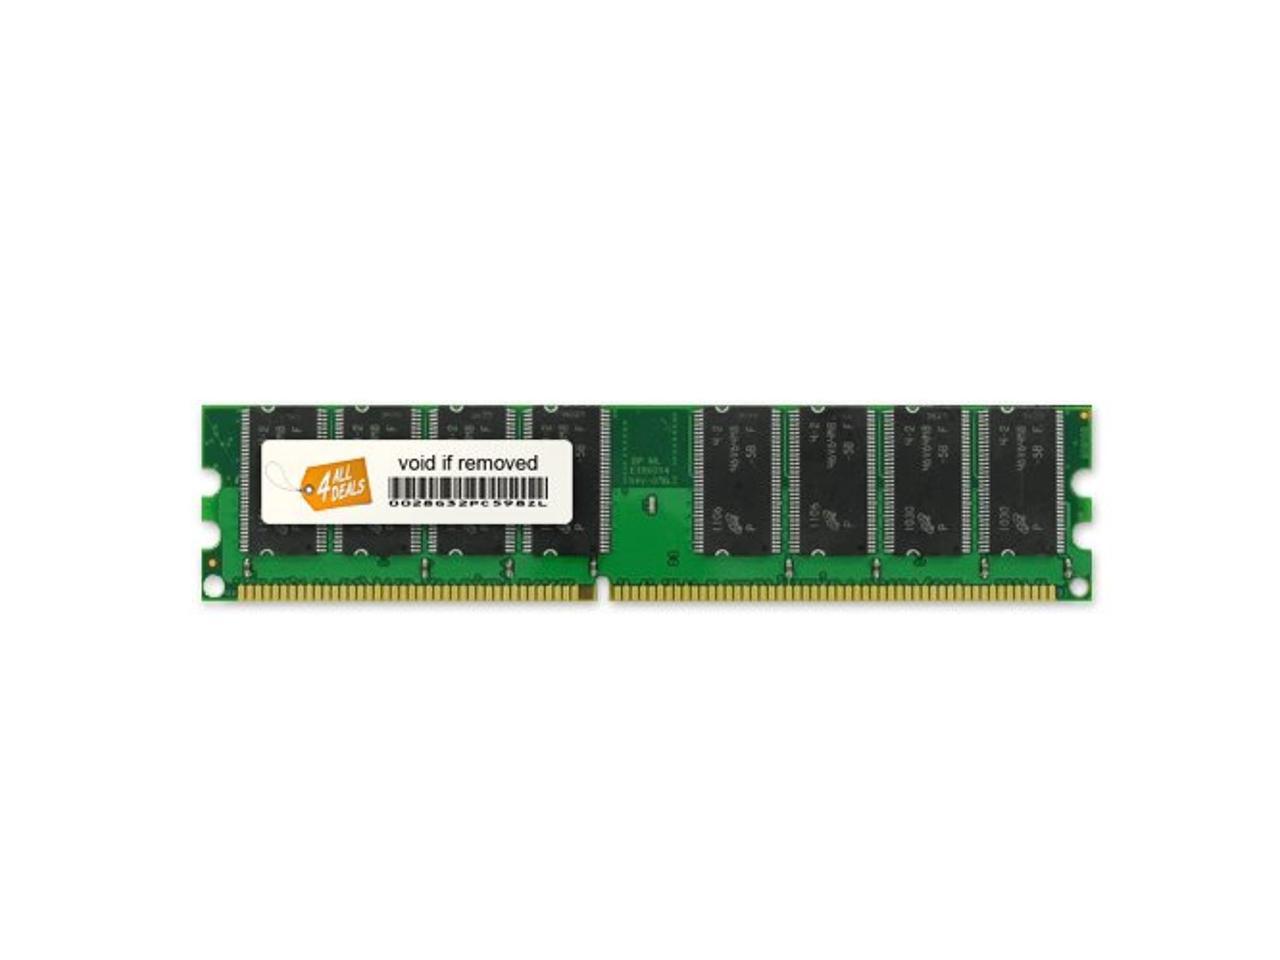 N411z Arch Memory 2 GB 204-Pin DDR3 So-dimm RAM for Dell Inspiron 14z 